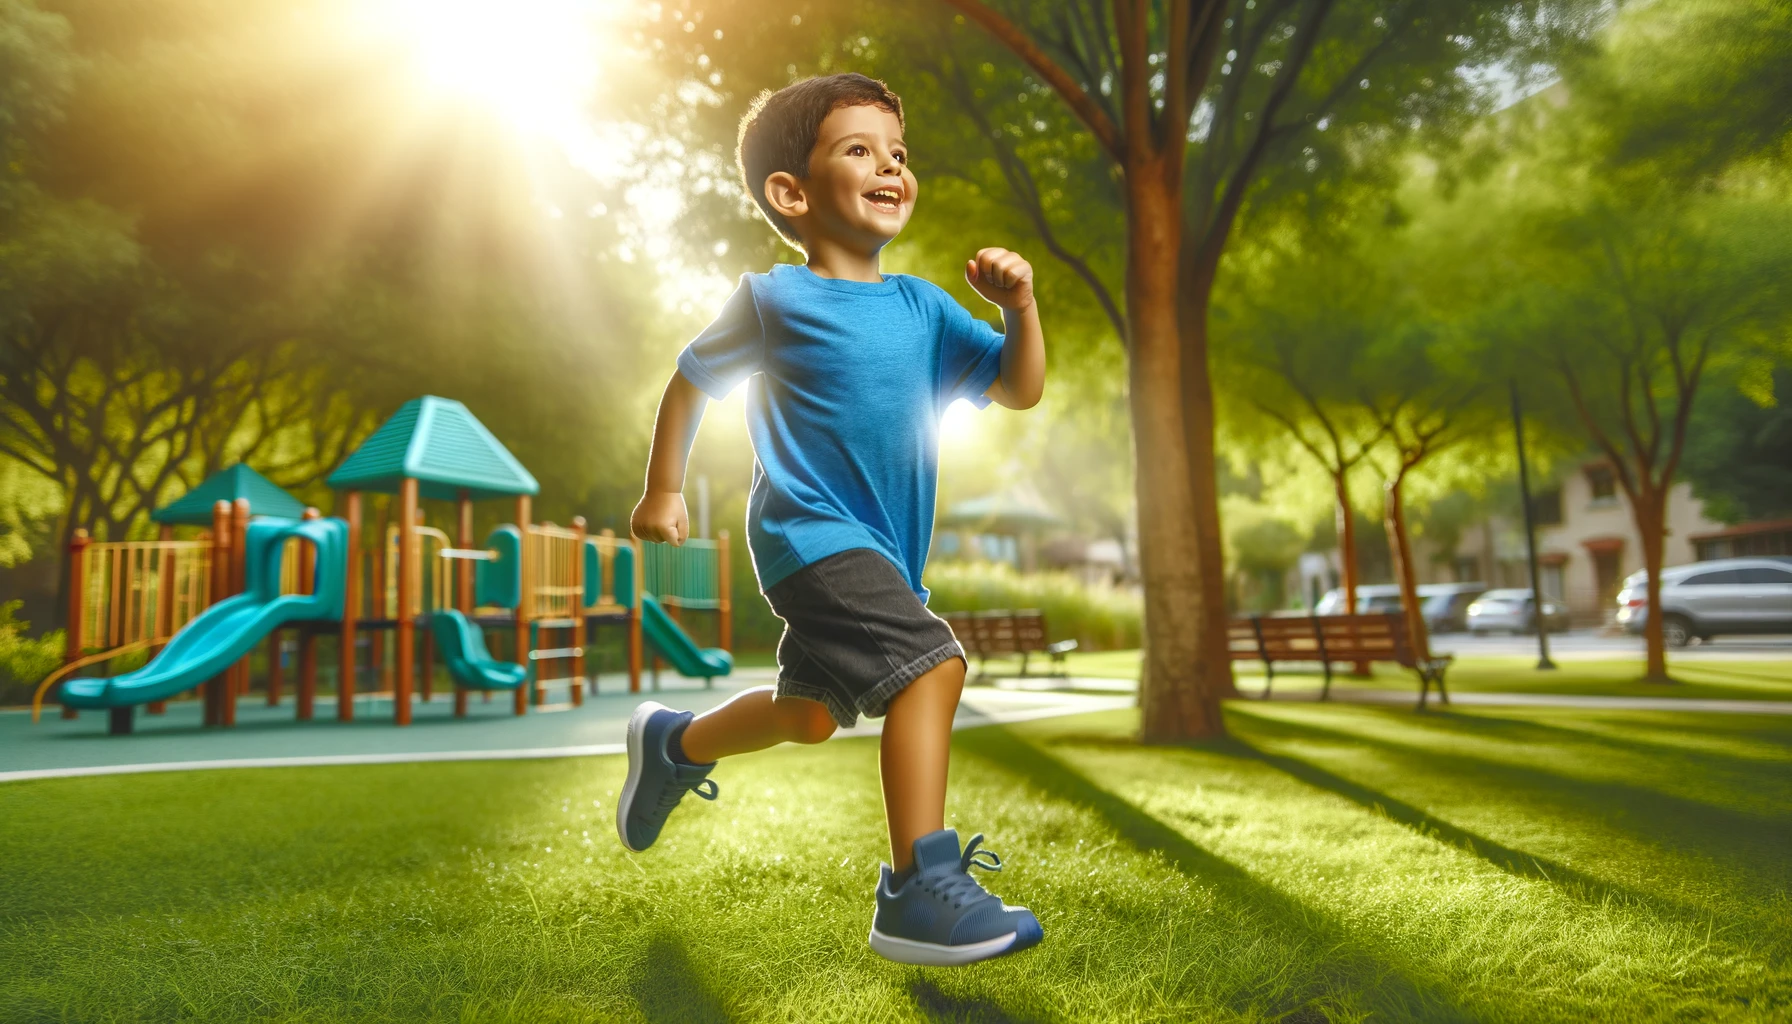 A young child joyfully playing outside in a park engaging in a variety of physical activities like running and jumping